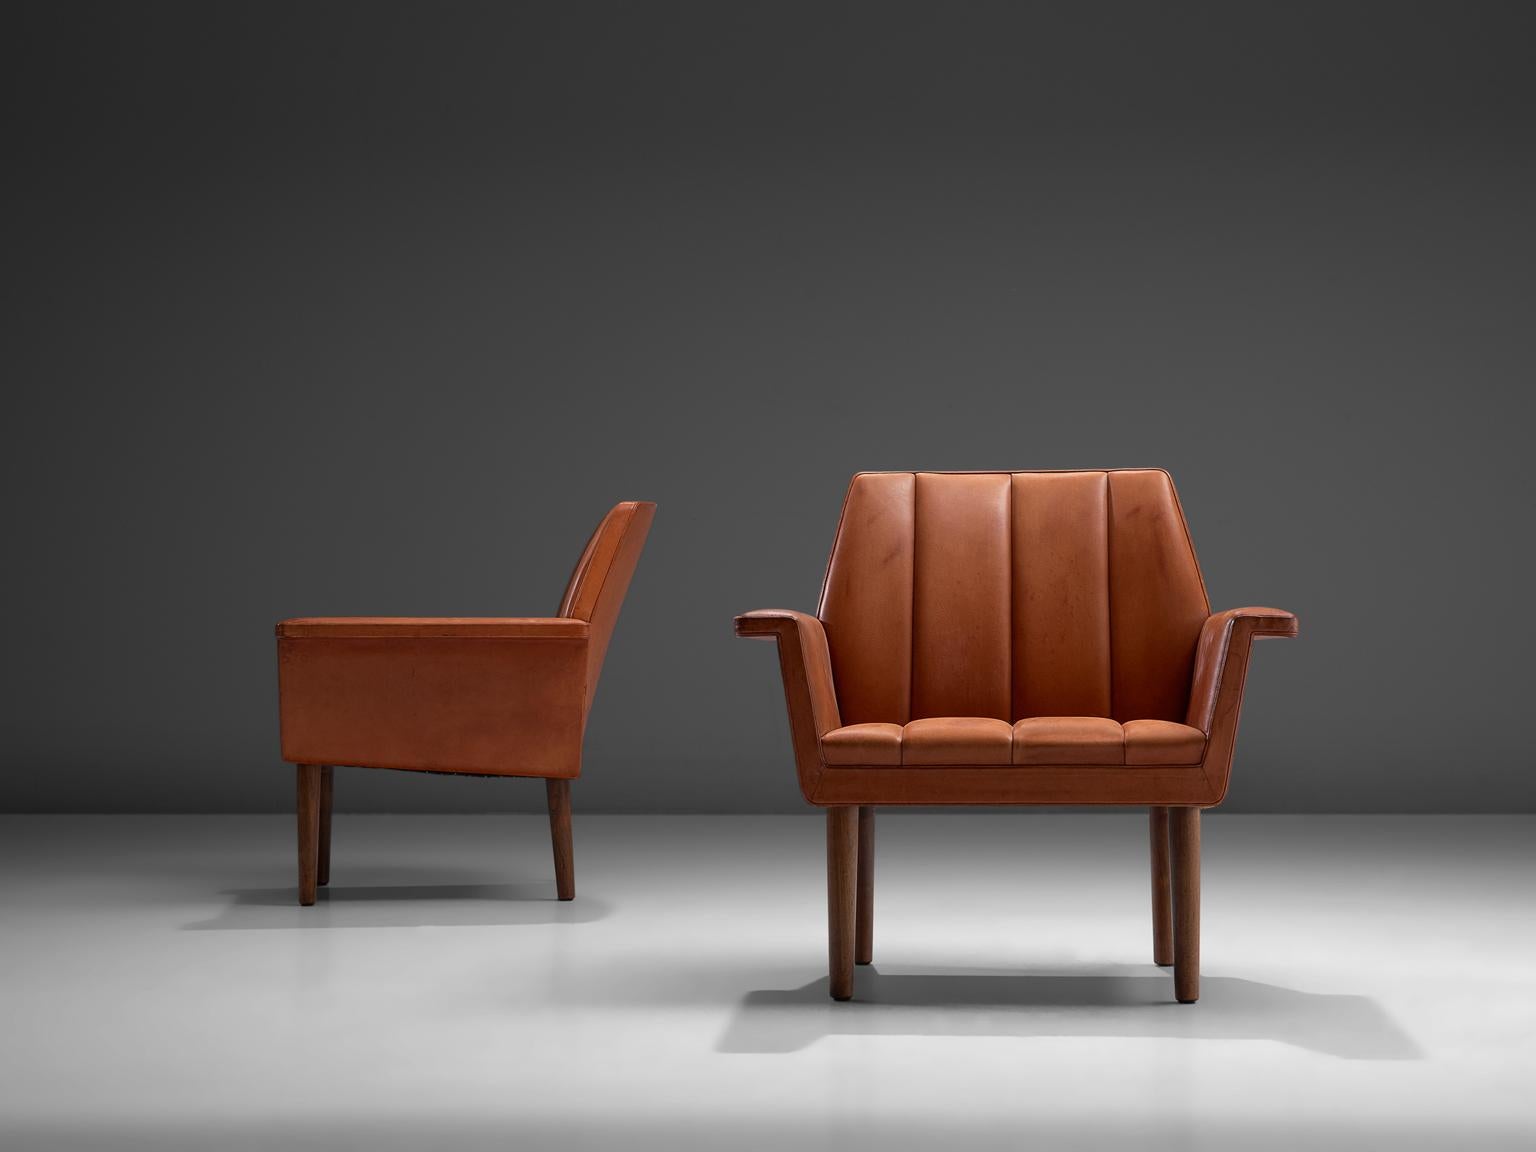 Set of two armchairs, in red leather and wood by Helge Vestergaard-Jensen for Peder Pedersen, Denmark, 1960. 

Pair of terracotta-red leather armchairs that stand high on their wooden legs, these chairs have a stately appearance. The seating is